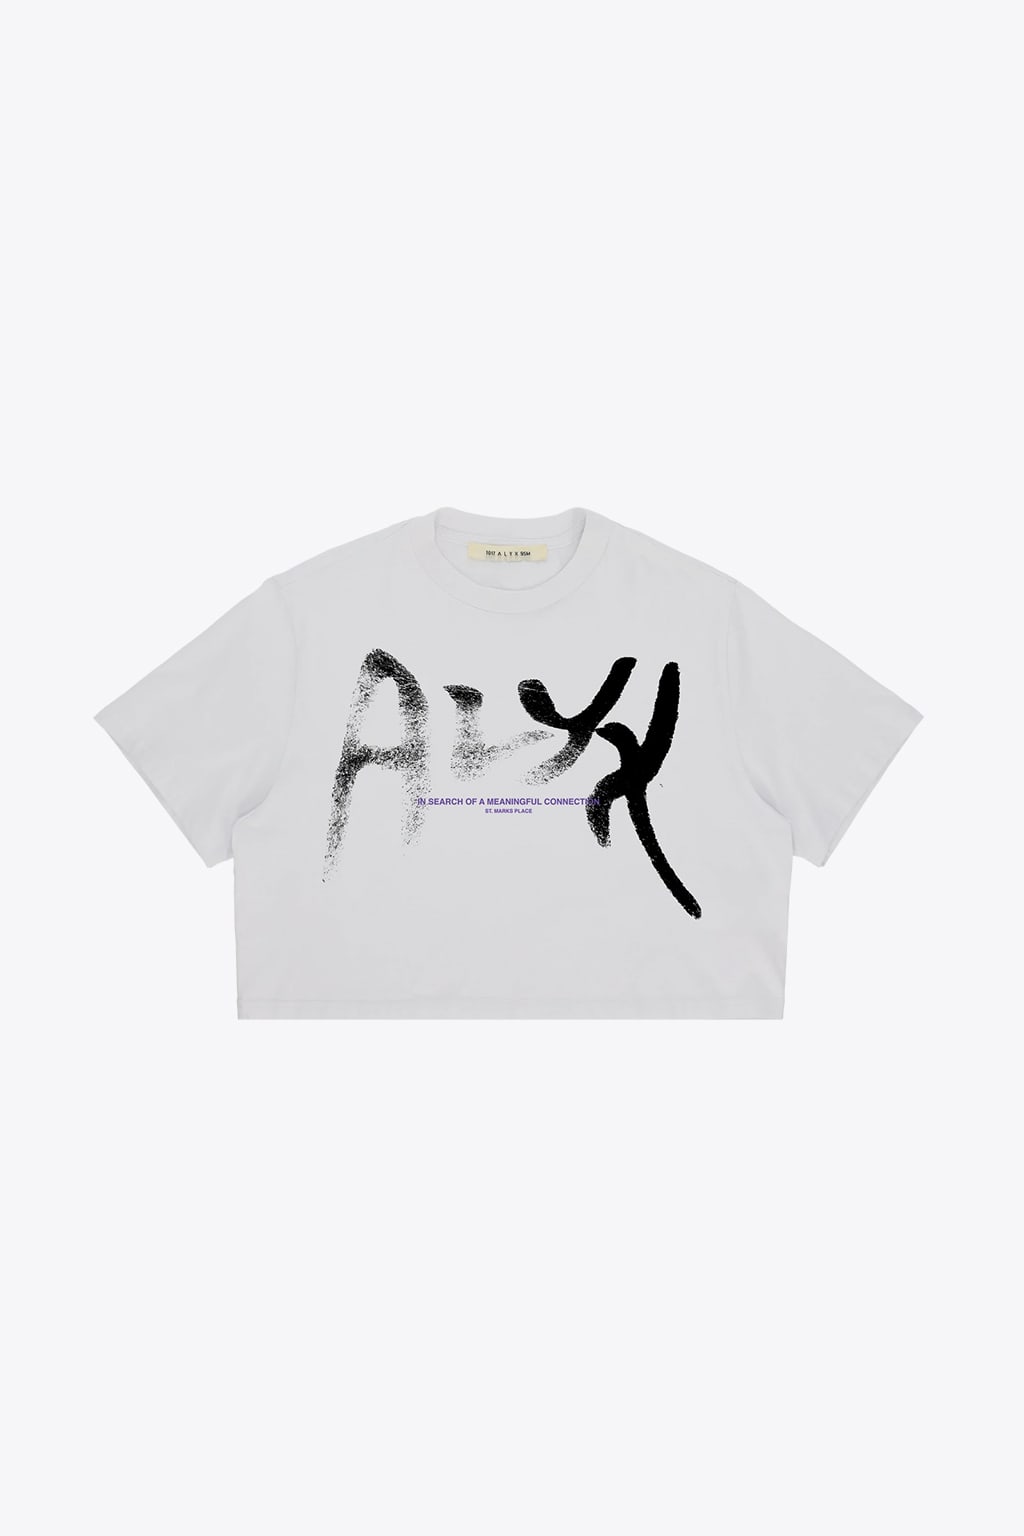 1017 ALYX 9SM Meaningful Connection Cropped White cotton cropped t-shirt - Meaningful cropped tee